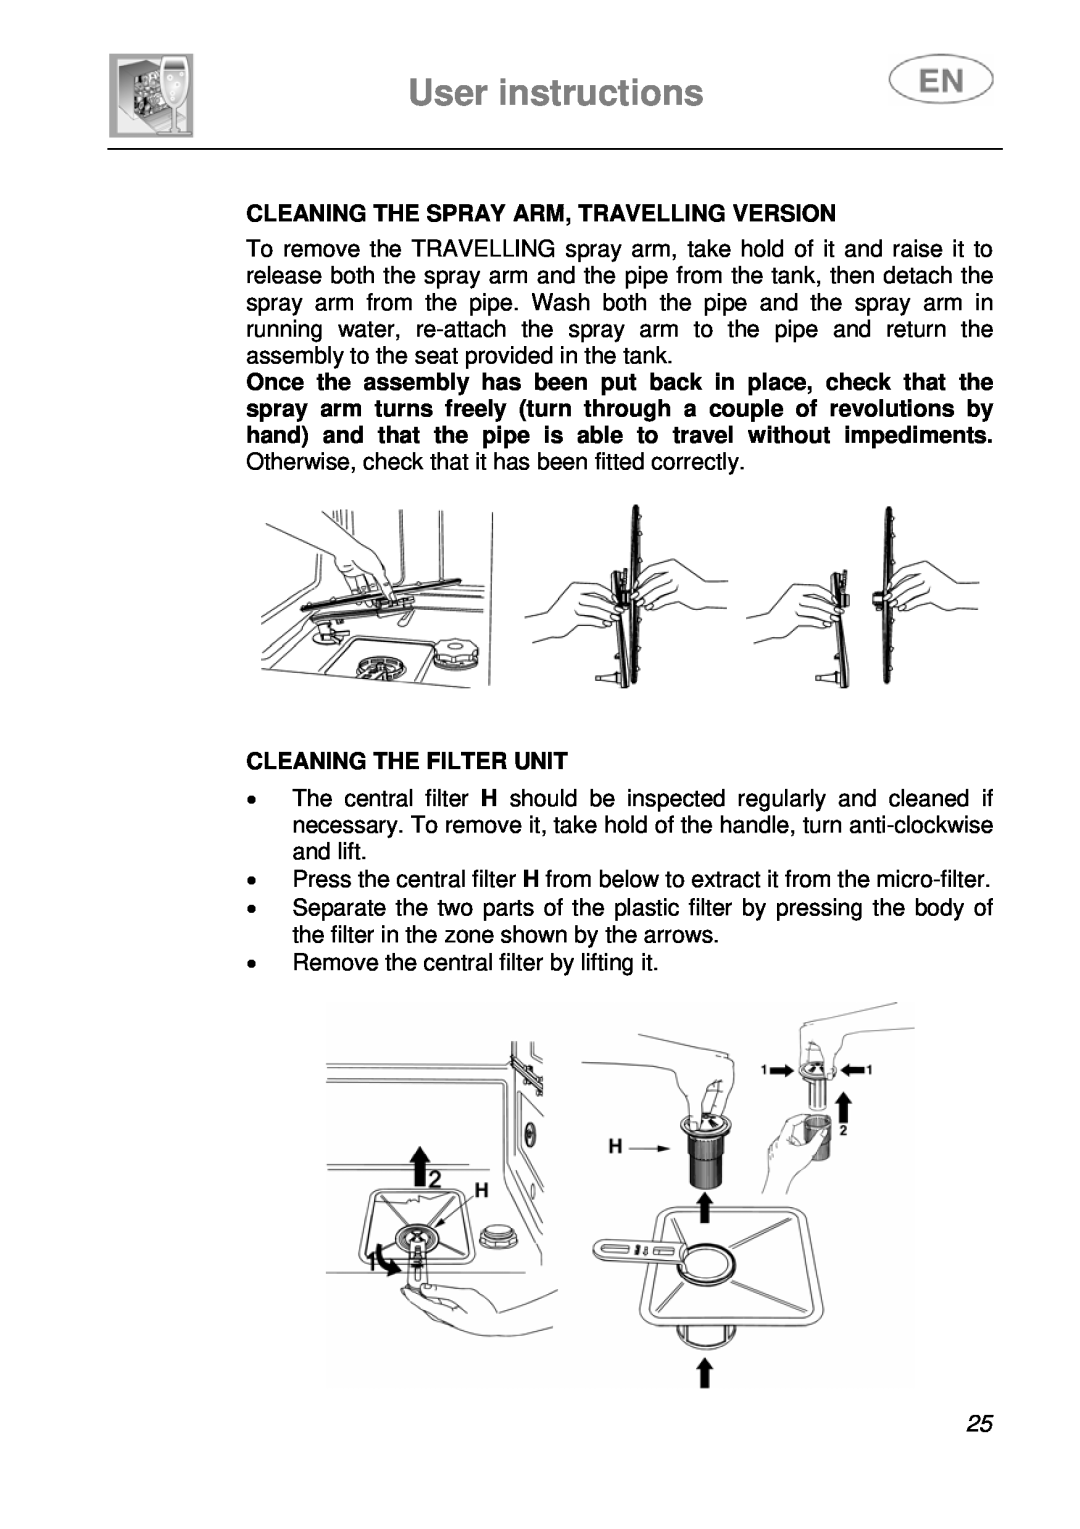 Smeg ST4108 manual User instructions, Cleaning The Spray Arm, Travelling Version, Cleaning The Filter Unit 